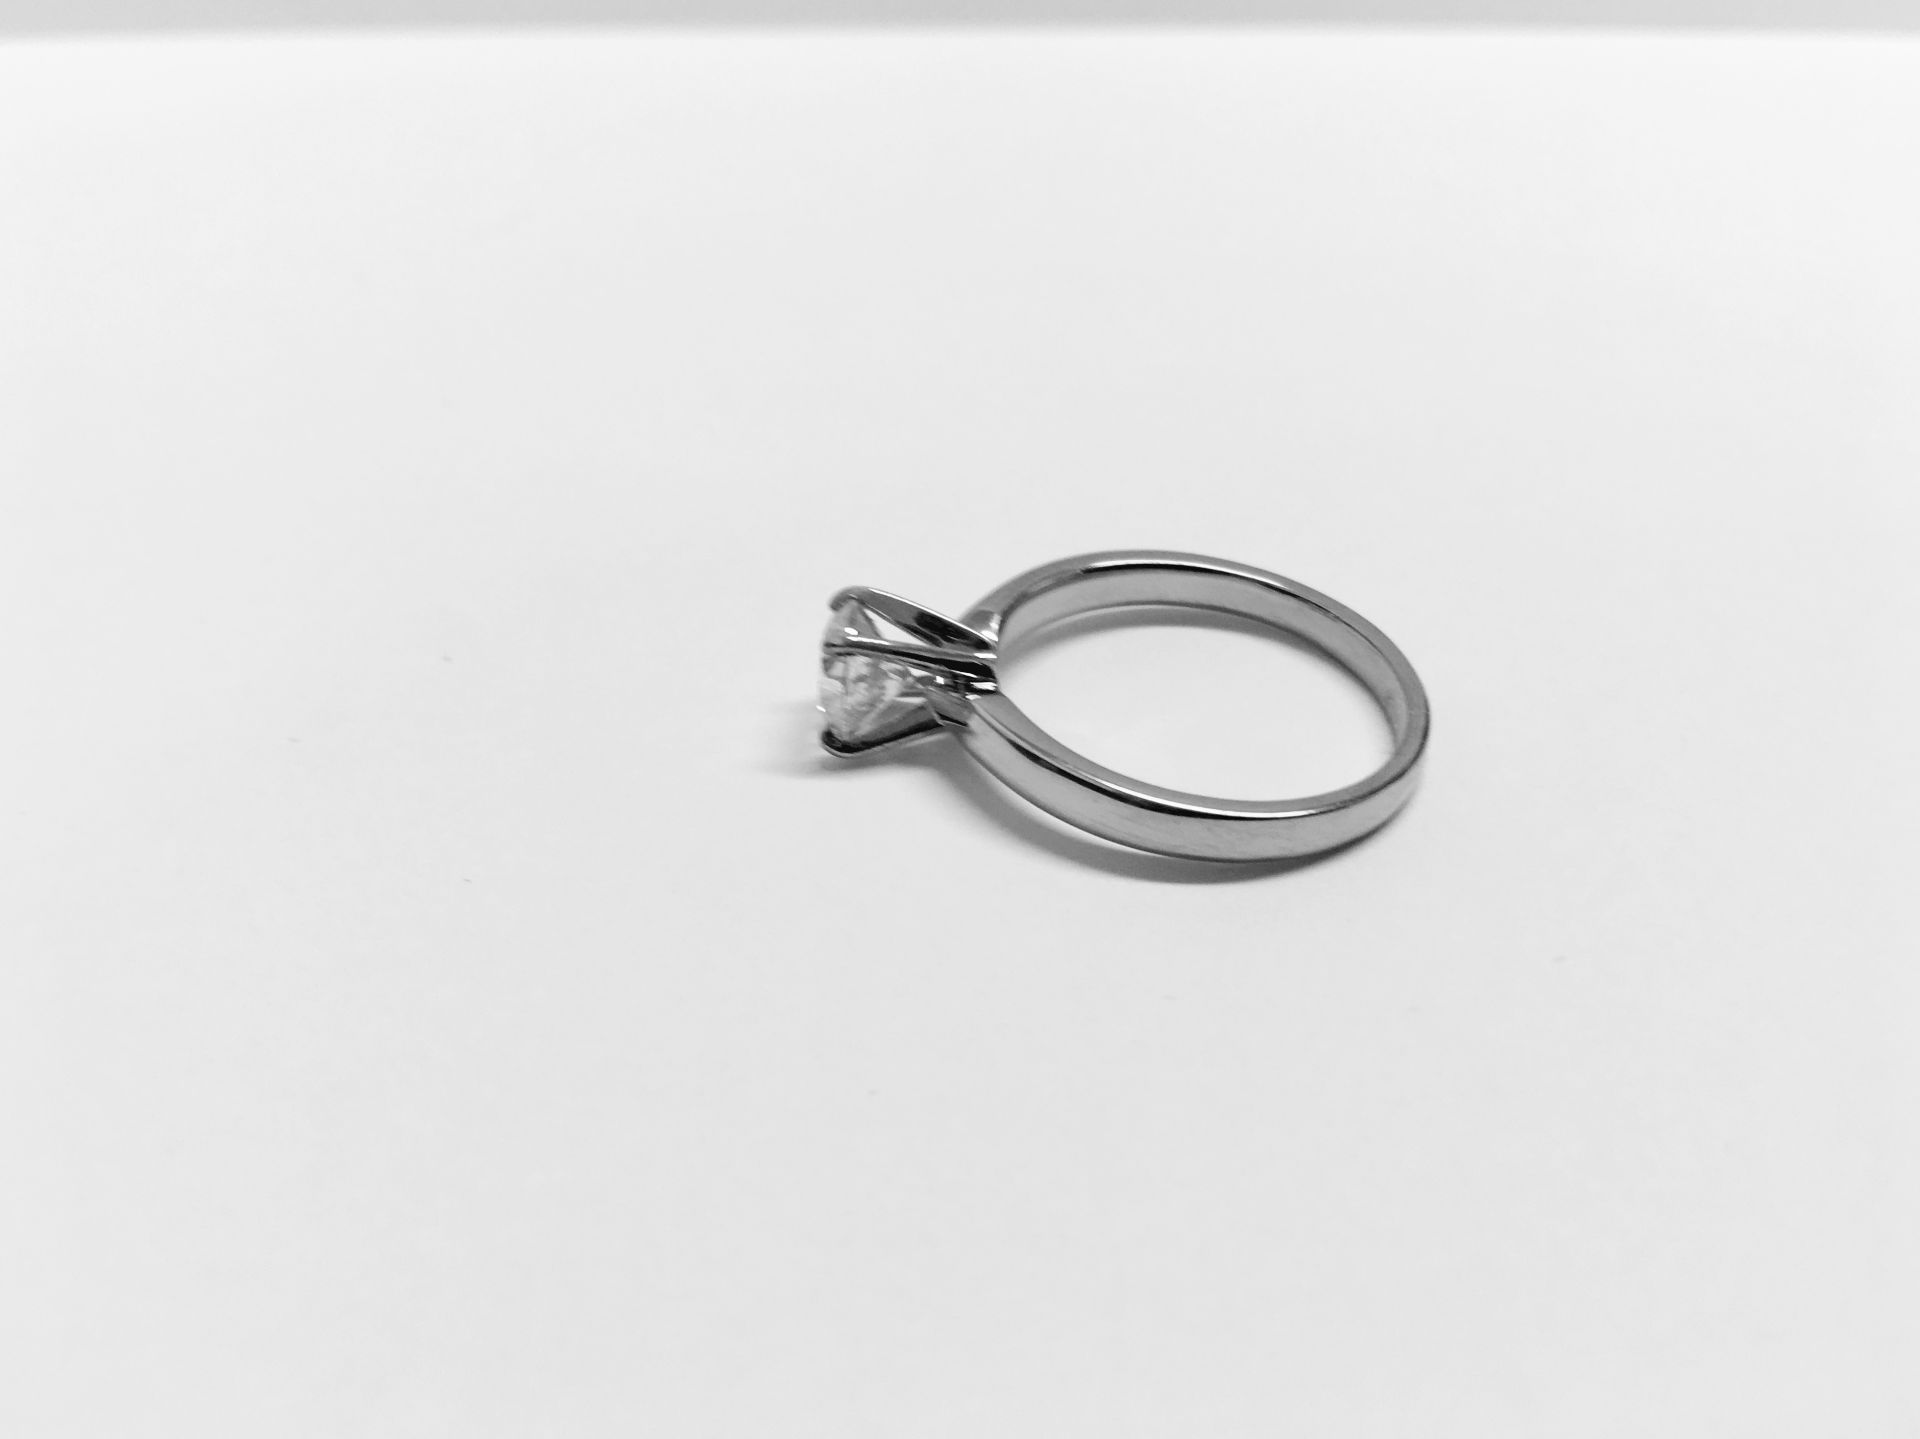 1.15ct diamond solitaire ring set in 18ct white gold. H colour and SI2 clarity. 4 claw setting. - Image 2 of 3